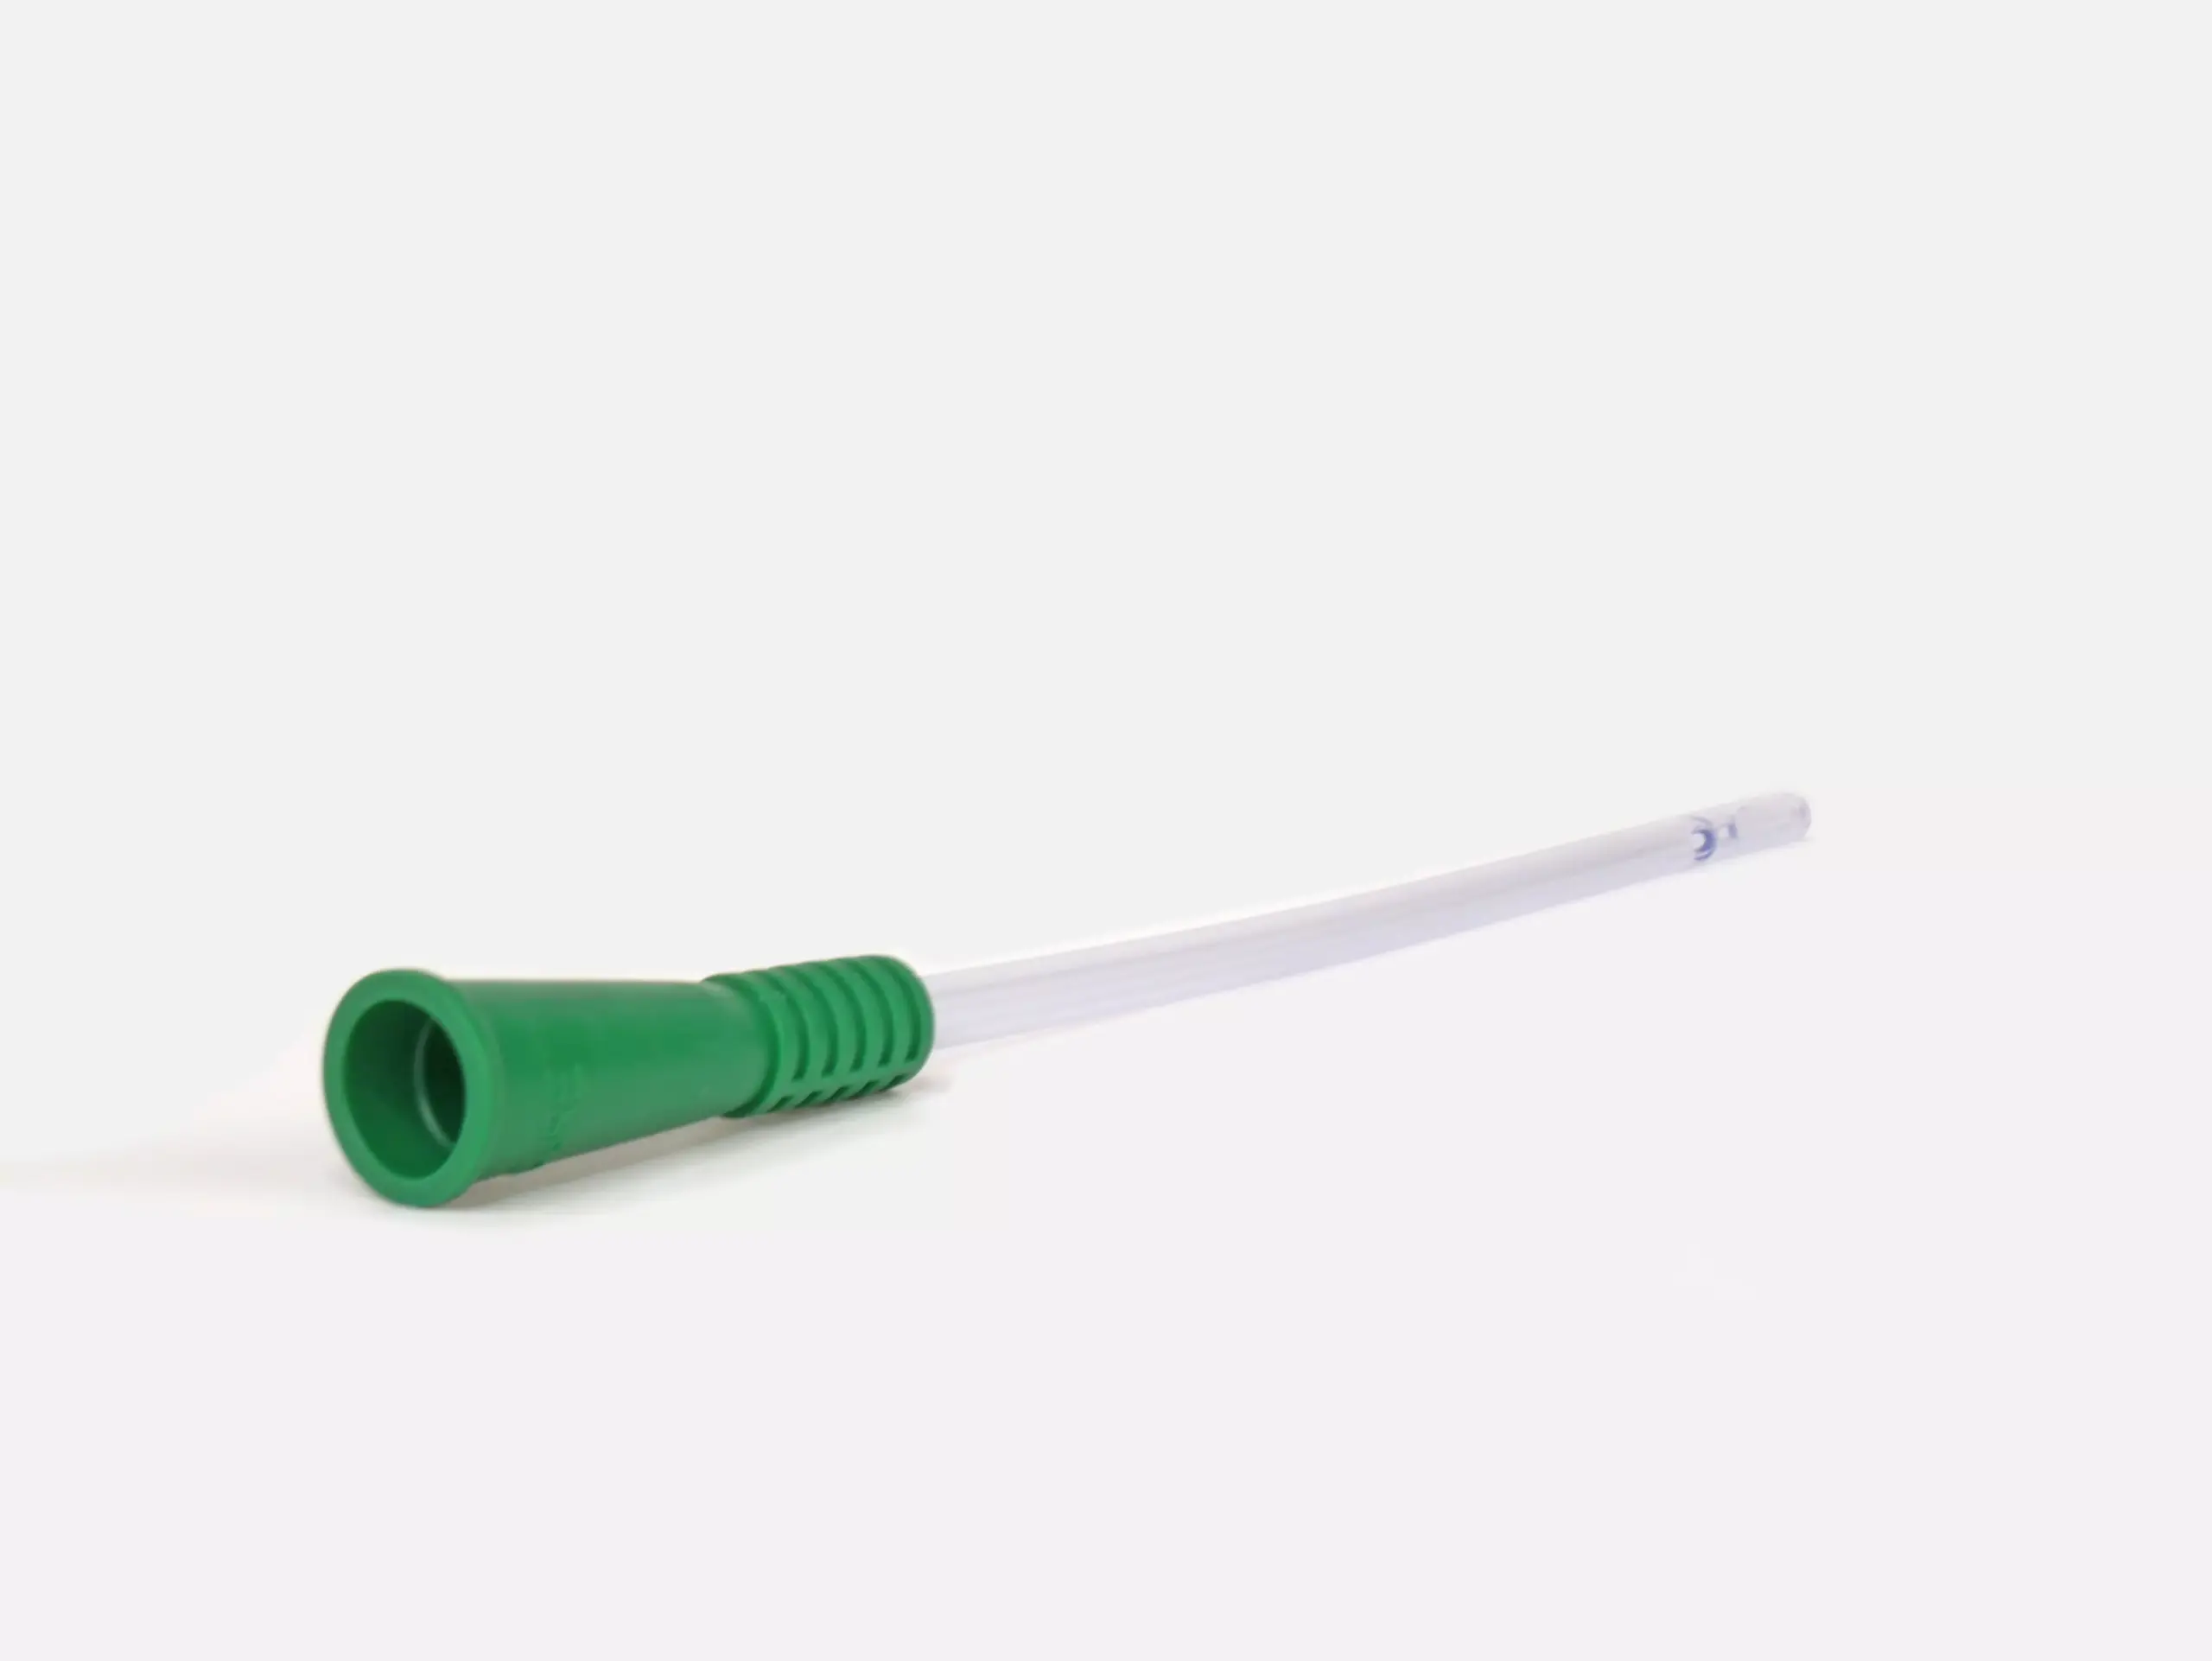 An in-depth product image highlighting an RA Fischer Co. catheter, a product tailored for urological care, and part of the Cure brand lineup. The image spotlights the eye-catching green gripper sleeve.